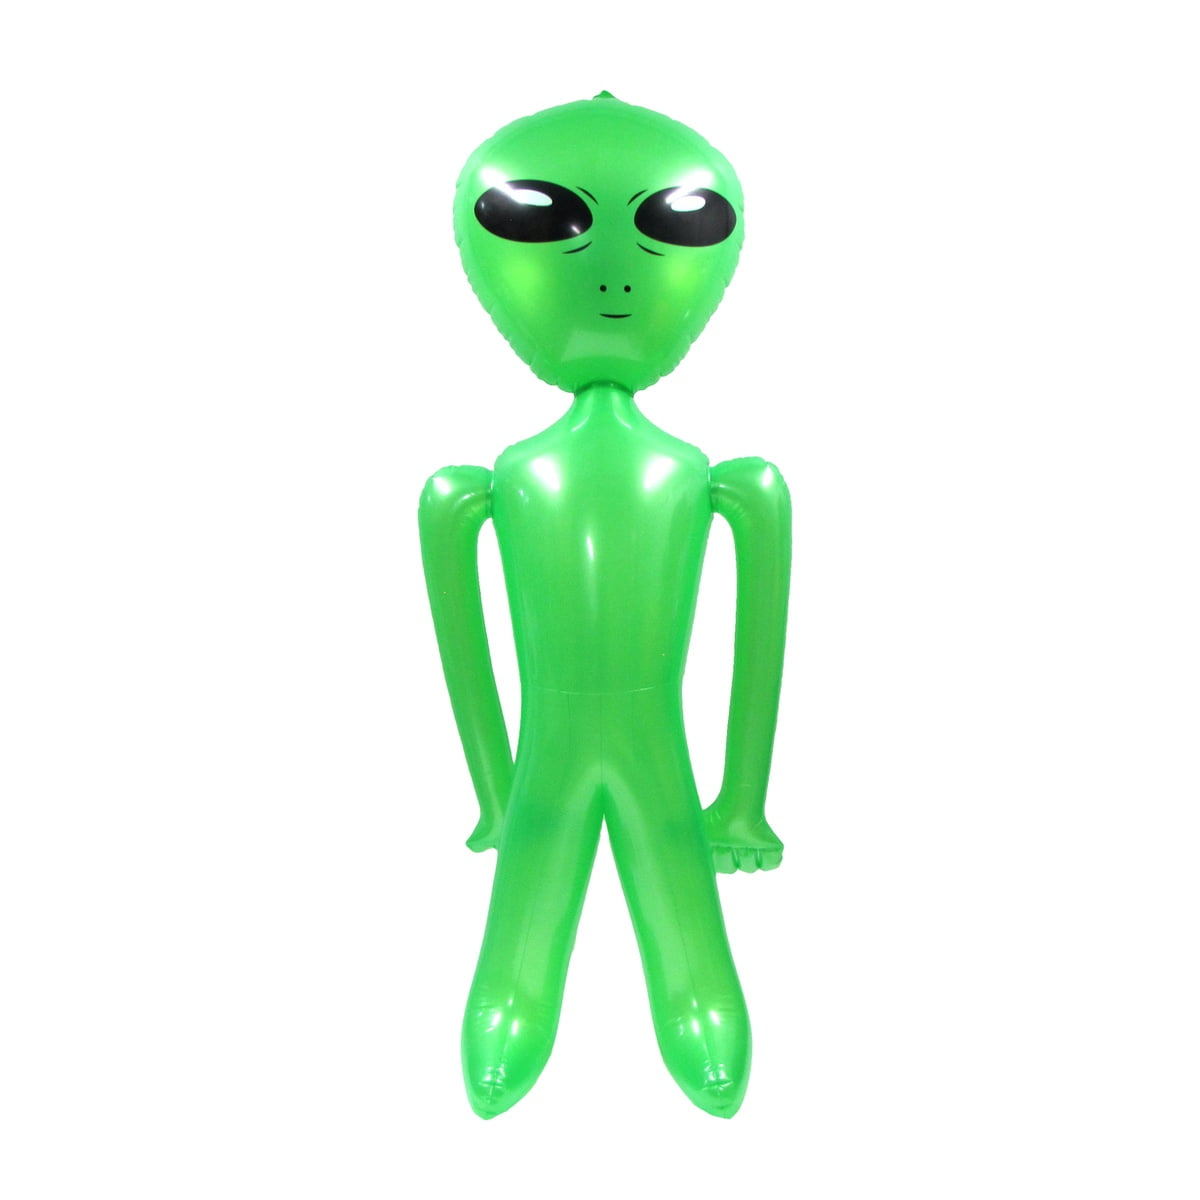 36" Alien Extraterrestrial Inflatable Hammer Fancy Dress Party Beach Pool Toy 